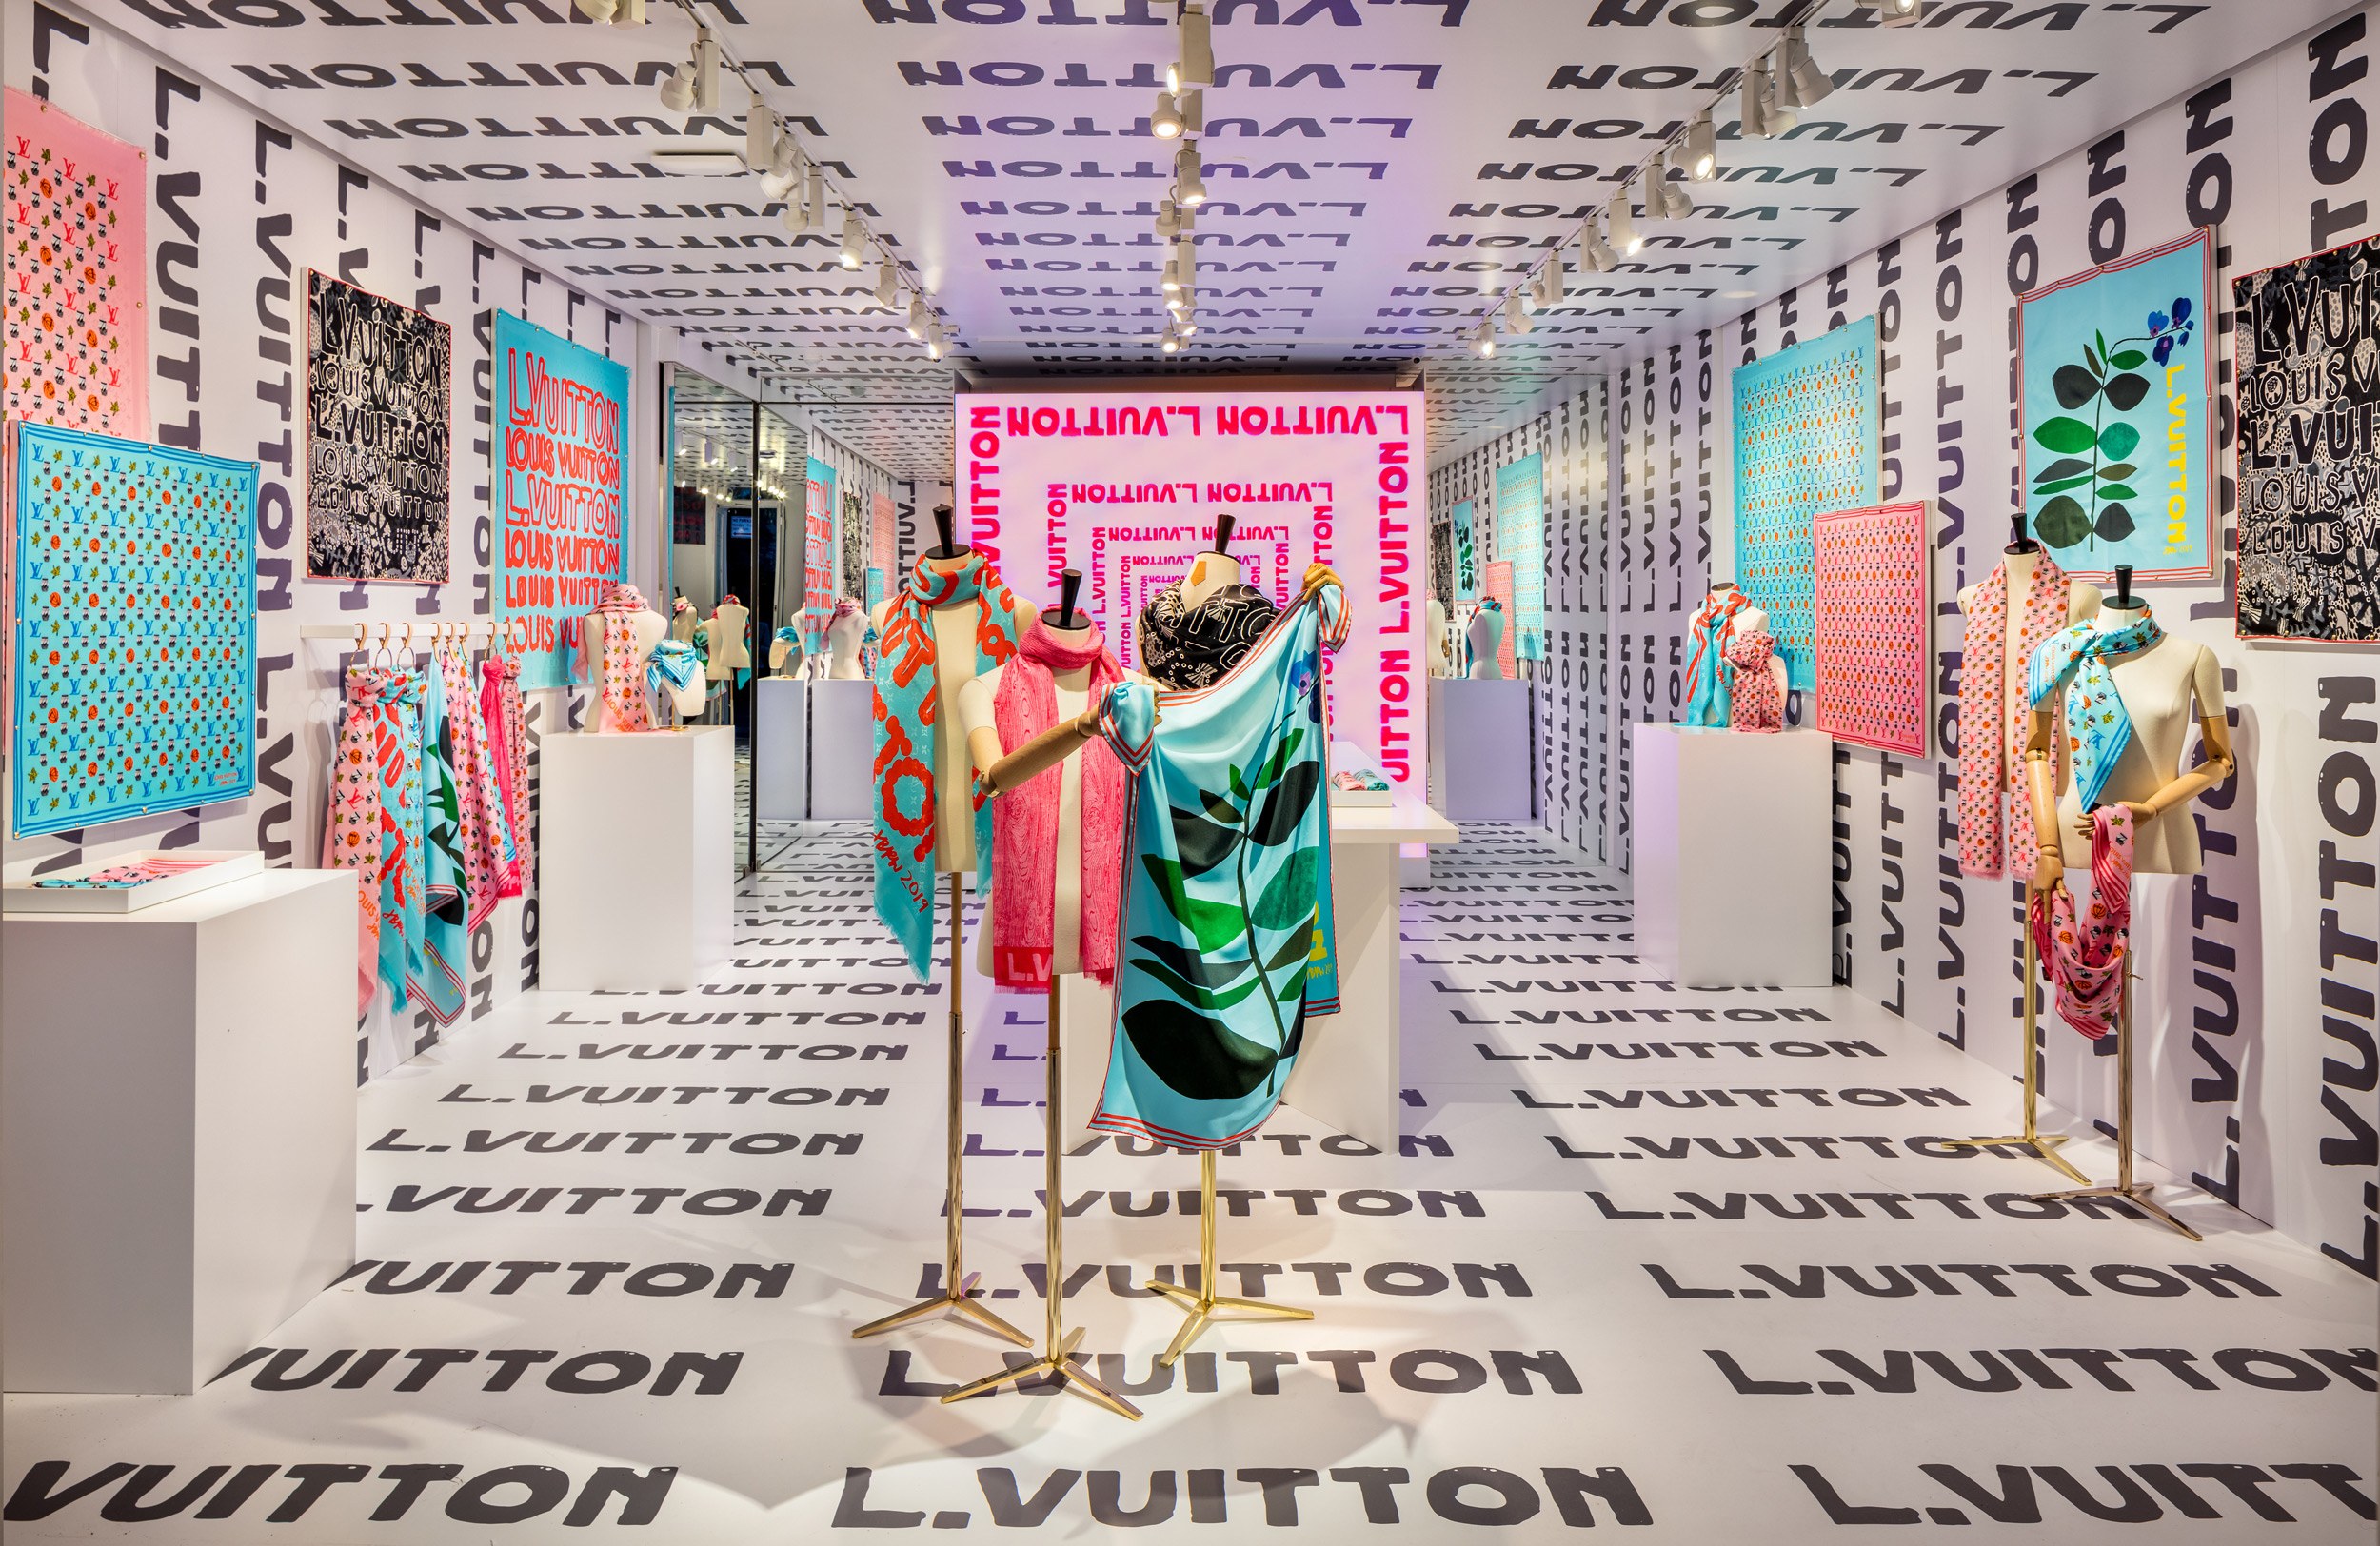 This Louis Vuitton Pop-Up Is a Must-See in NYC